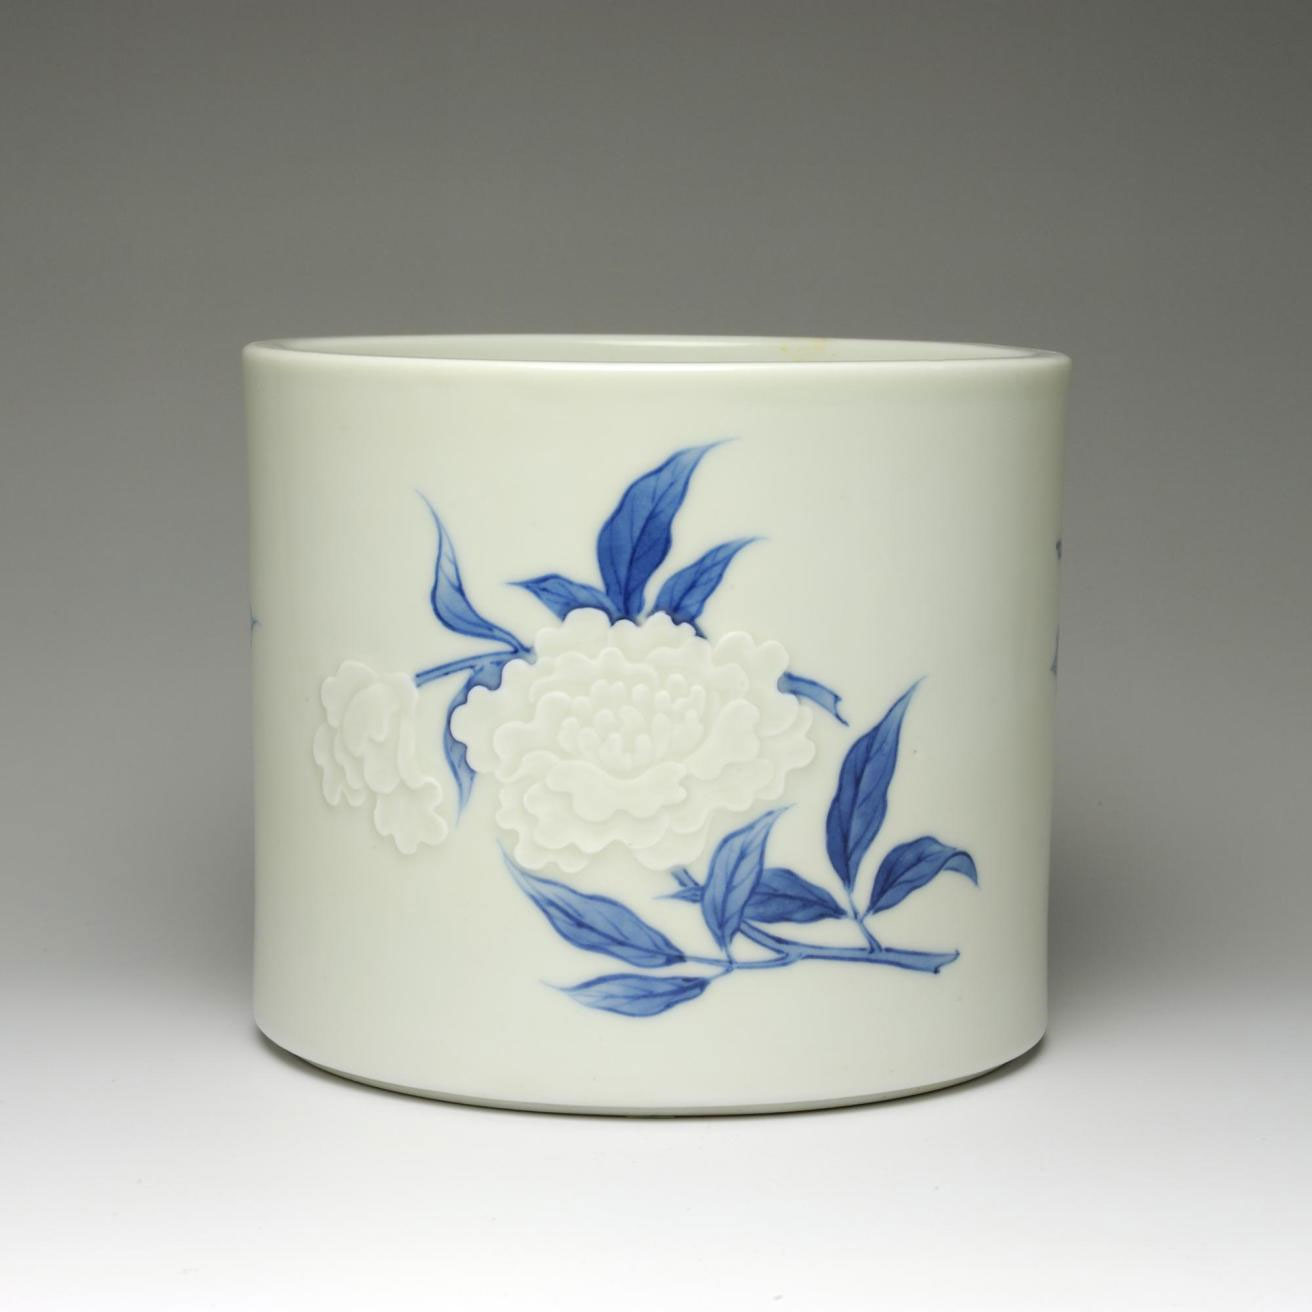 Straight-sided porcelain water jar (mizusashi) for tea ceremony, with low relief and underglaze blue decoration of peonies: Japan, c1890s.